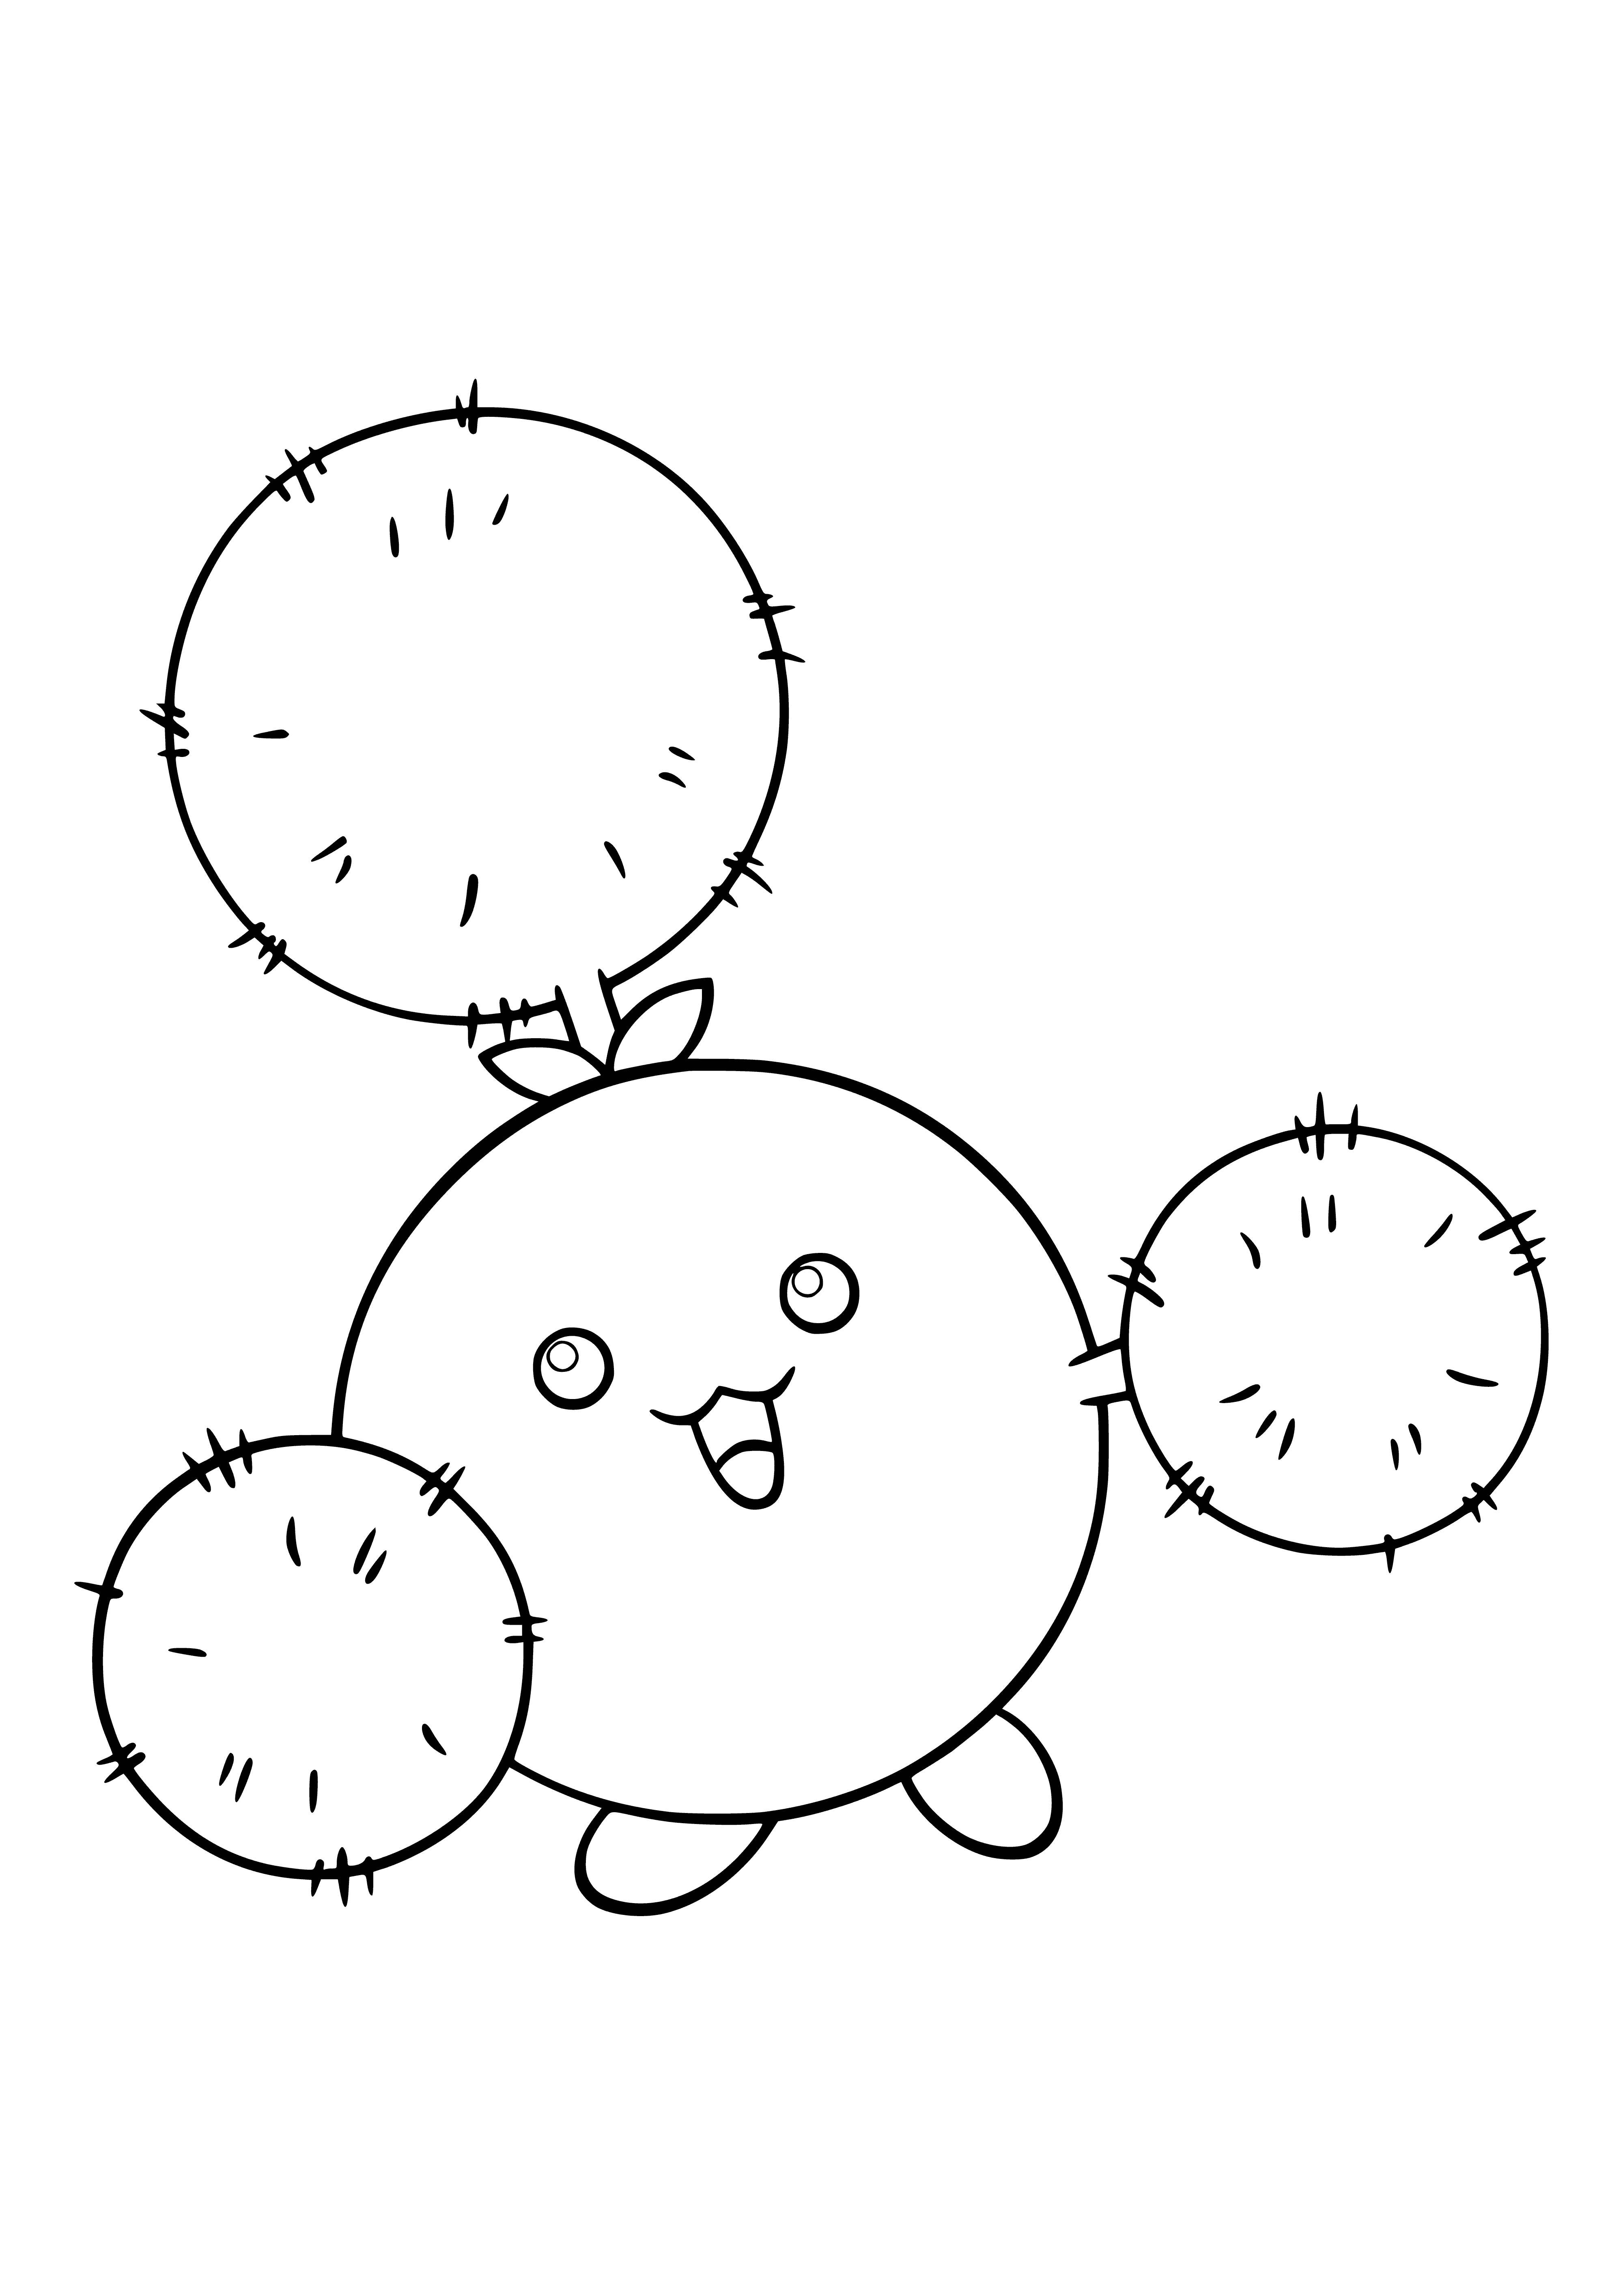 coloring page: Cute blue & white Pokémon that looks like a cross between a Pokémon & a plant, with big eyes, puffy round body & short legs & tail.